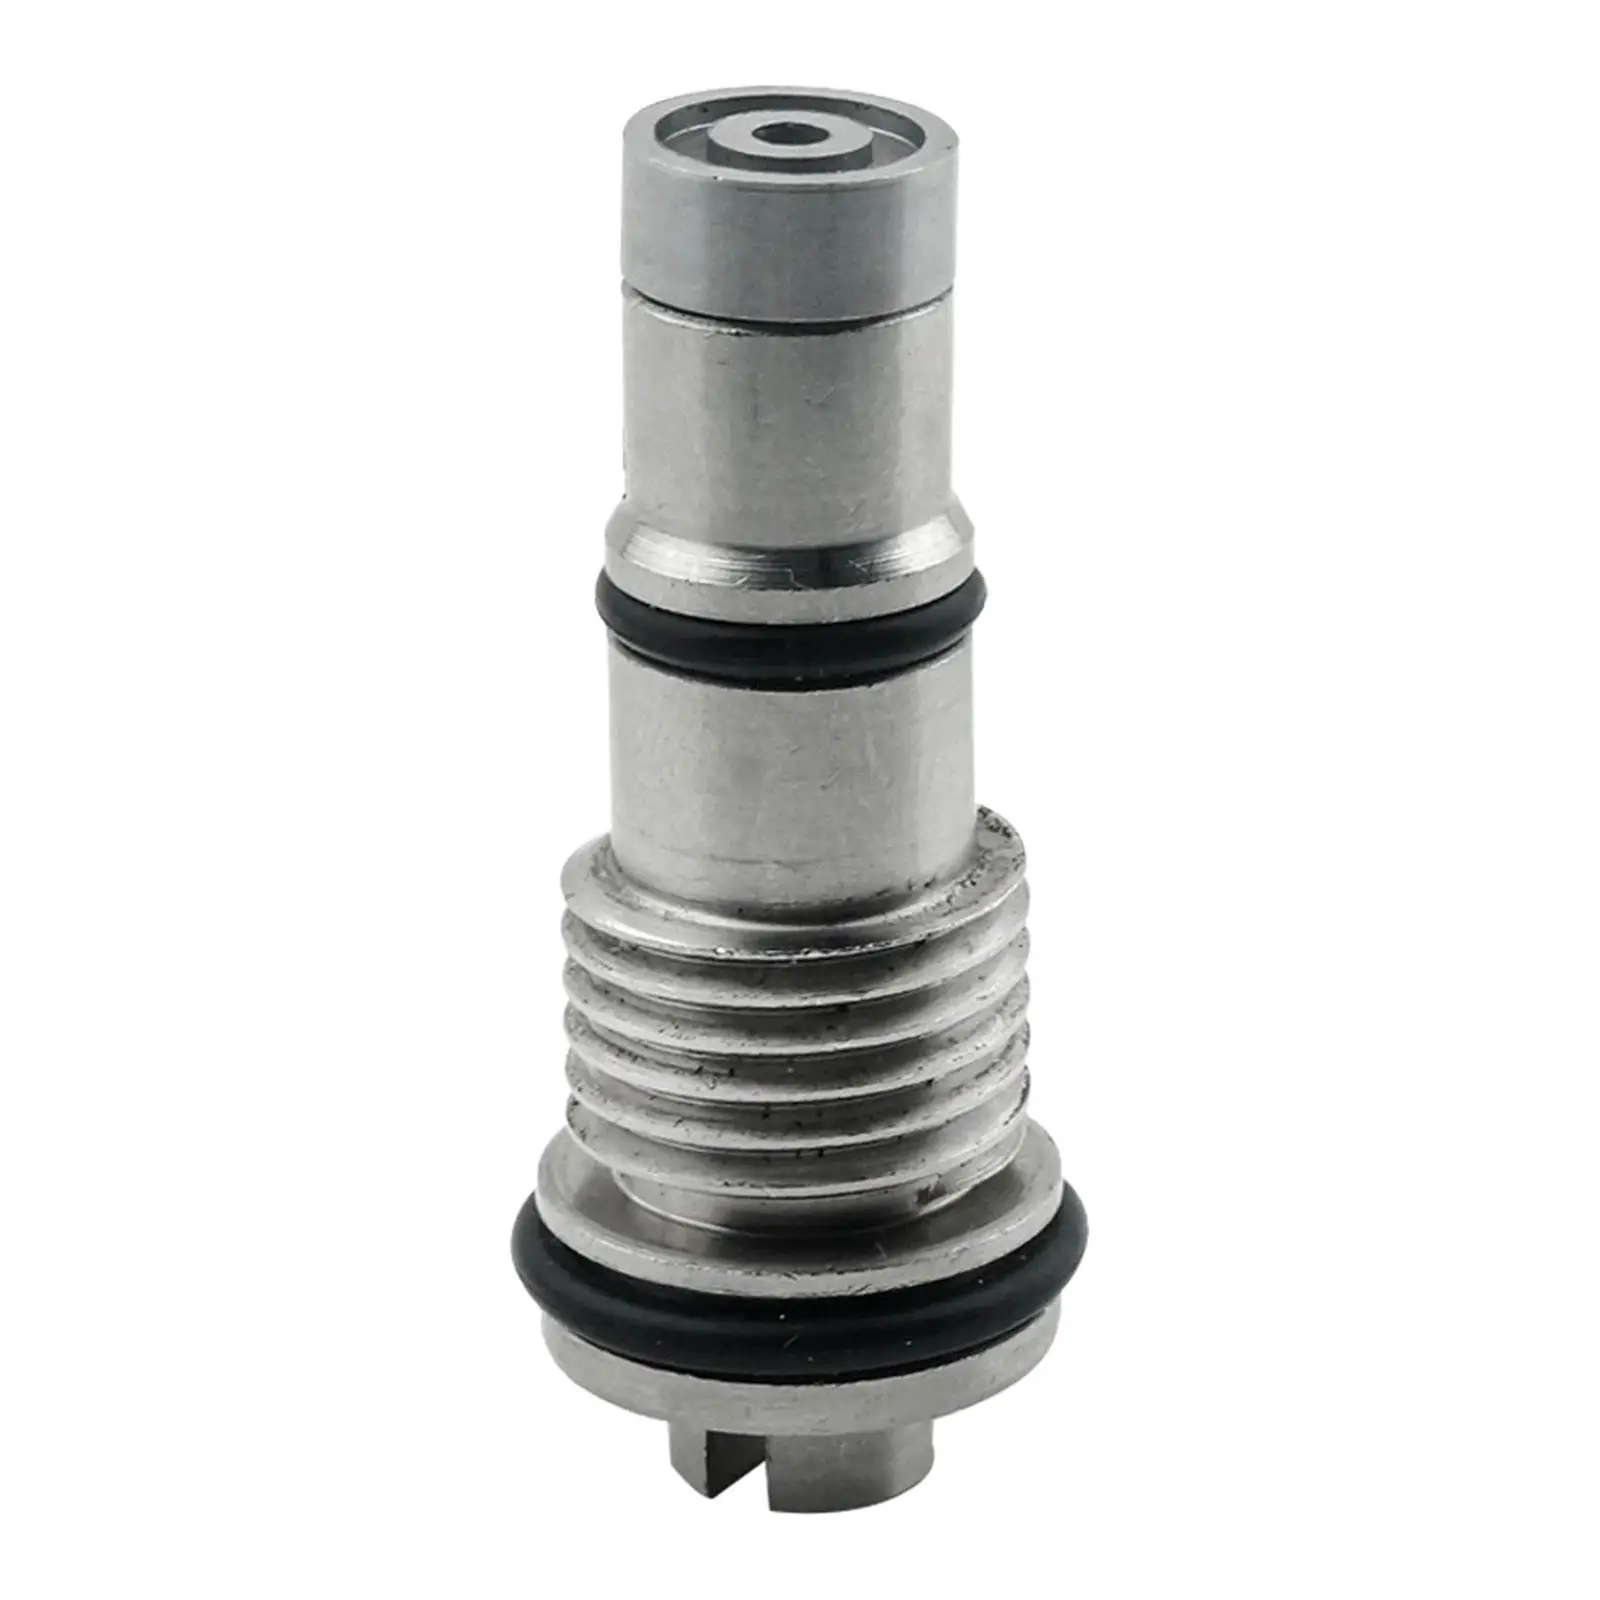 Manual Release Valve Replacement 48864-93J00 for Suzuki Outboard Trim Tilt Replaces Professional Motorbikes Accessories